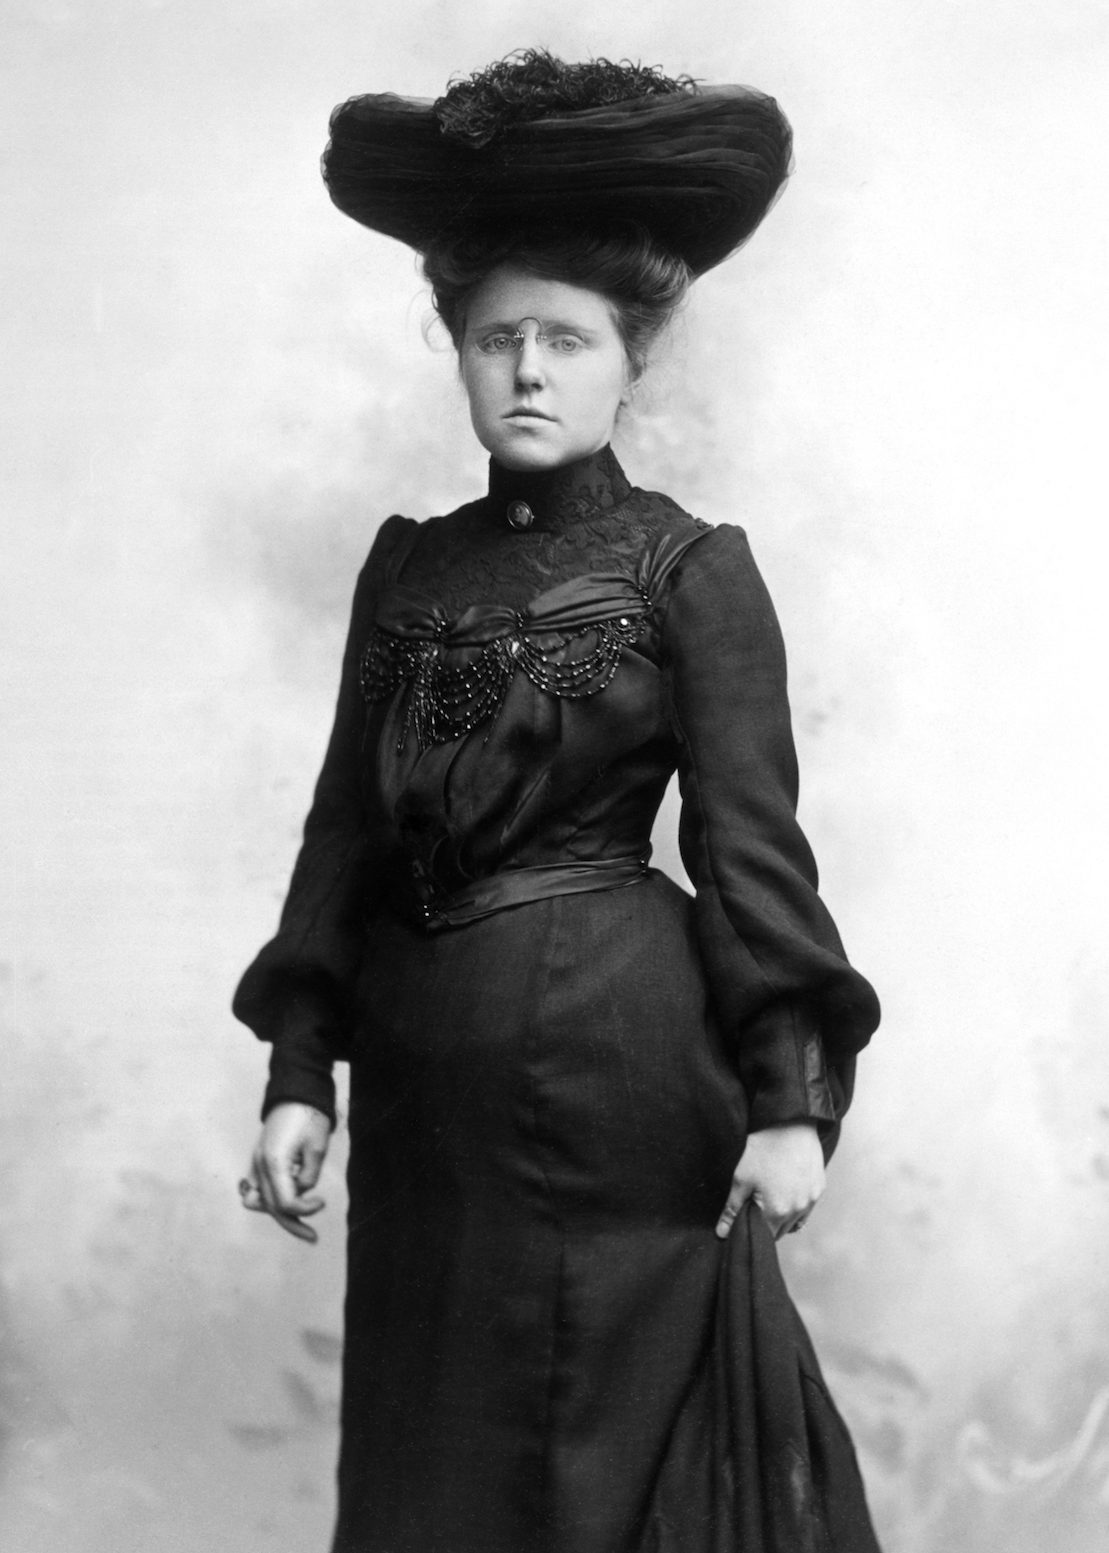 1890s 1900s SEPIA PORTRAIT OF WOMAN SERIOUS FACIAL EXPRESSION BLACK DRESS AND HAT   (Photo by H. Armstrong Roberts/ClassicStock/Getty Images)